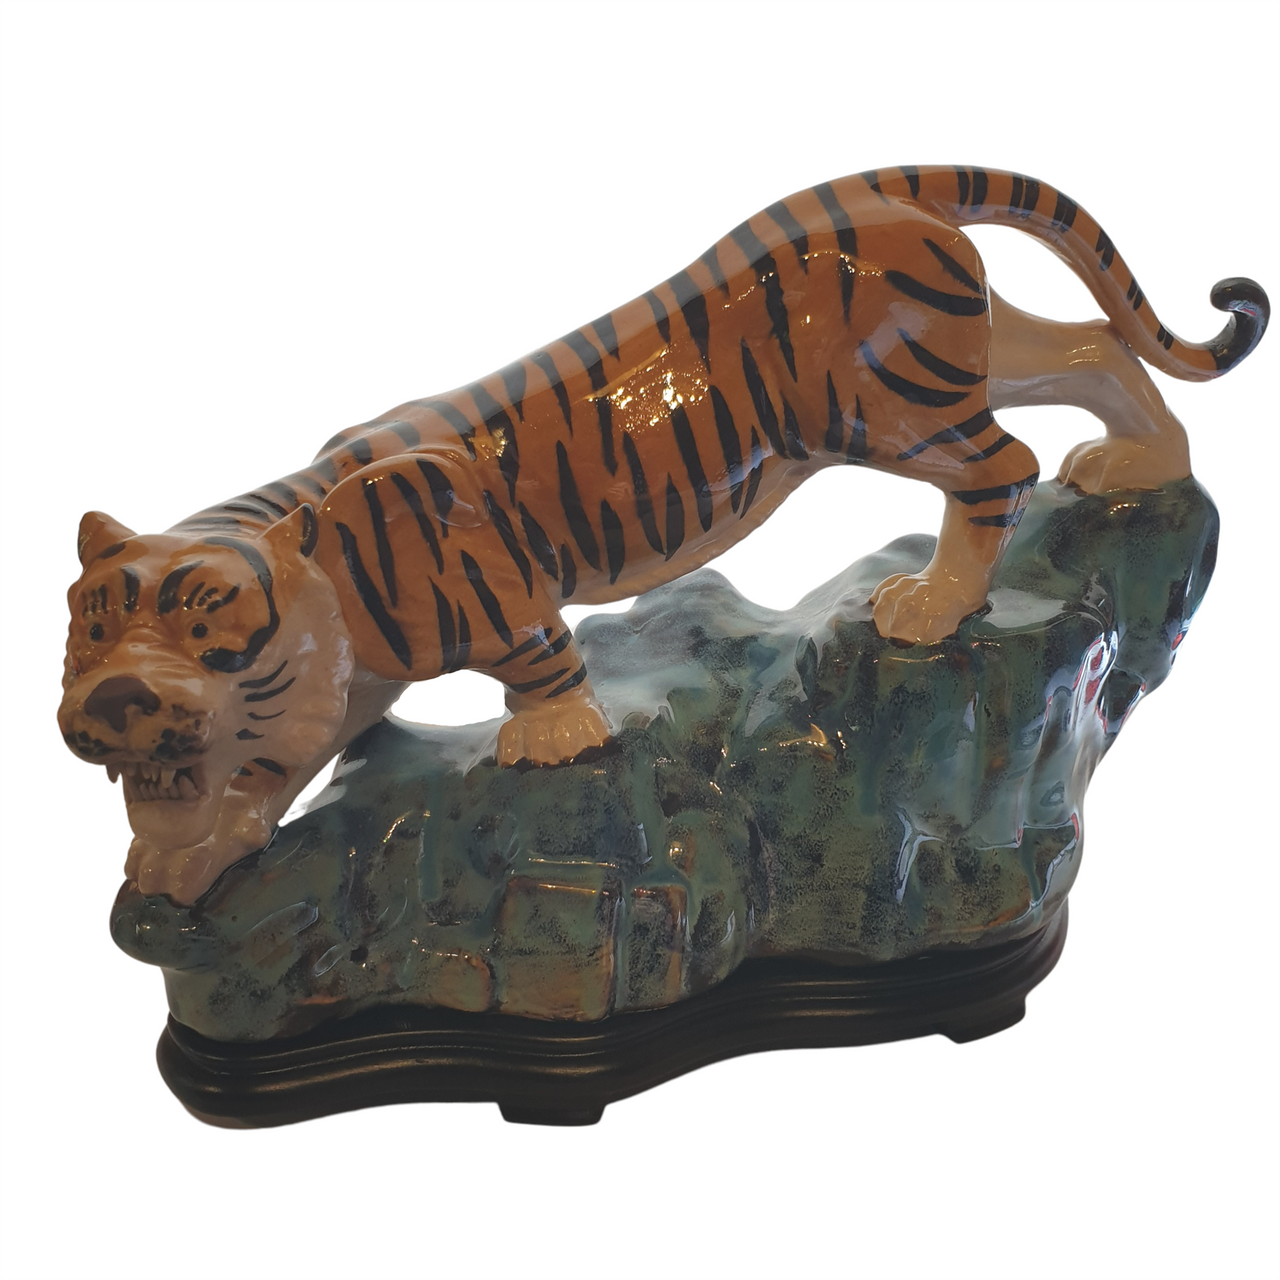 Chinese Shiwan Figurine - Prowling Tiger - Wooden Stand - 31cm